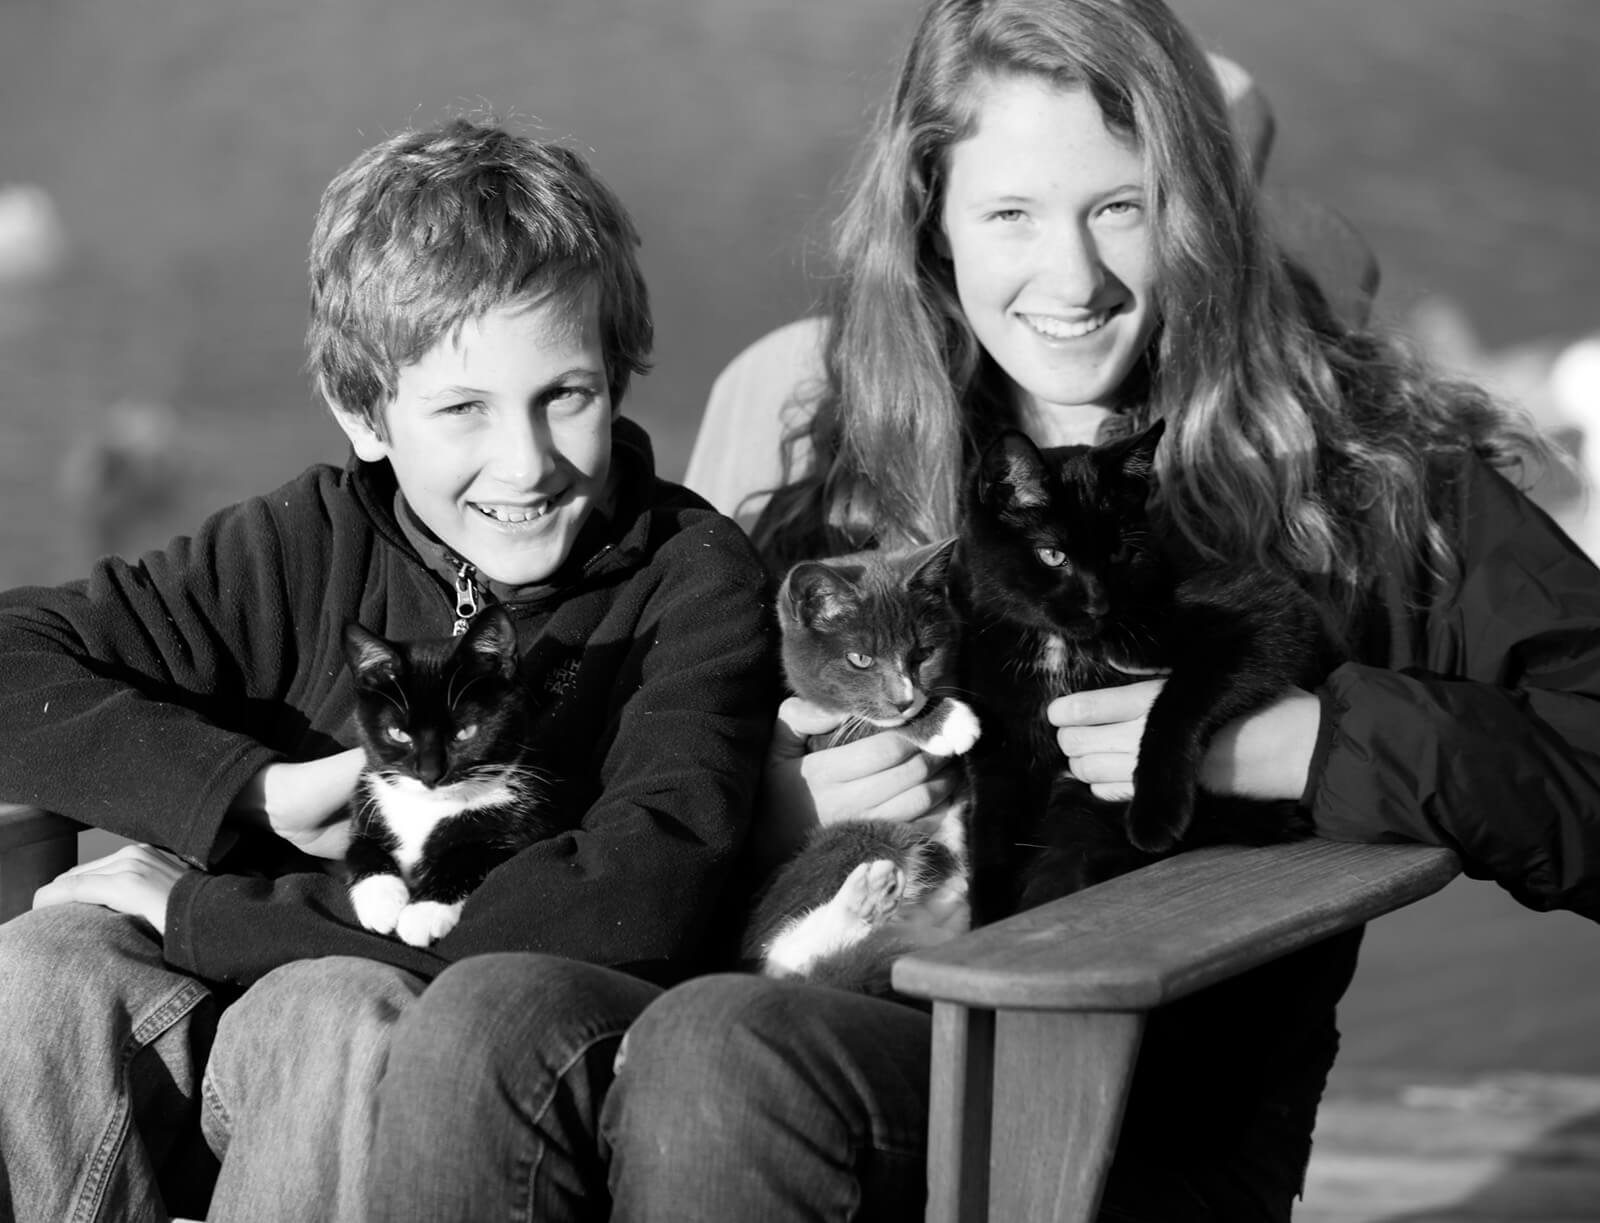 Brother and sister smile at the camera in a black and white photo, holding three, tiny black and white kittens.